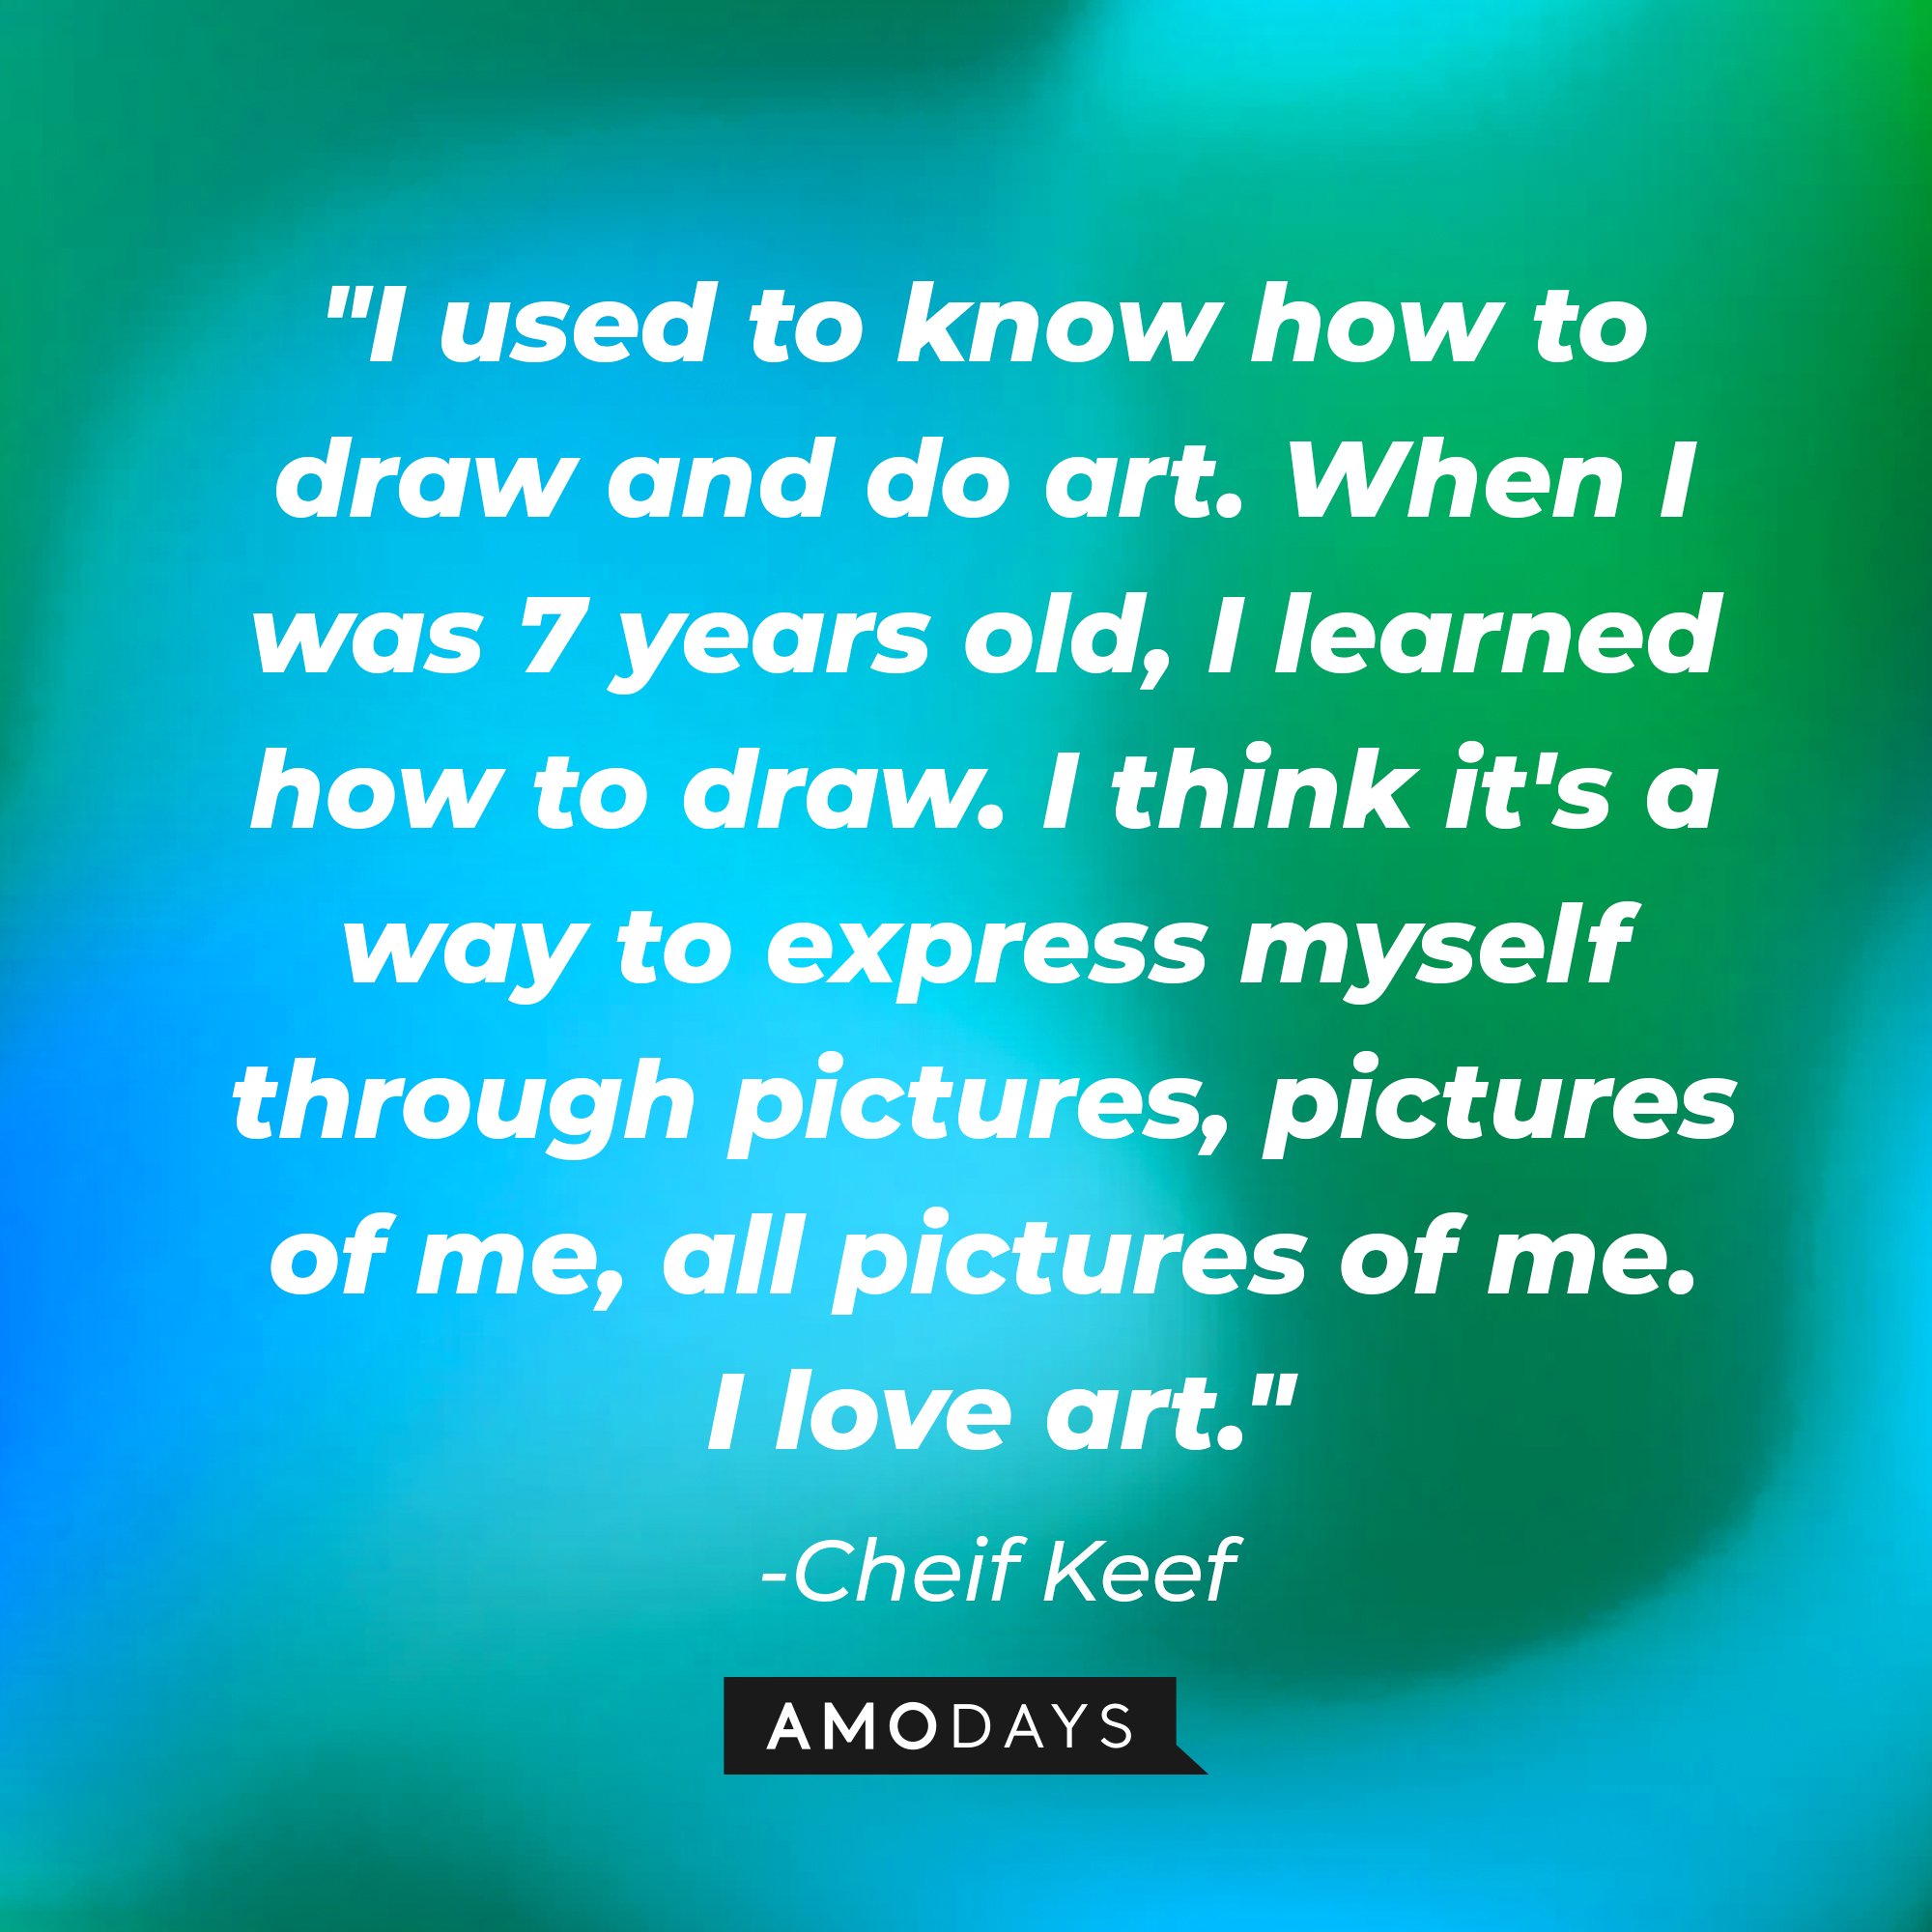  Chief Keef’s quote: "I used to know how to draw and do art. When I was 7 years old, I learned how to draw. I think it's a way to express myself through pictures, pictures of me, all pictures of me. I love art." | Image: AmoDays 